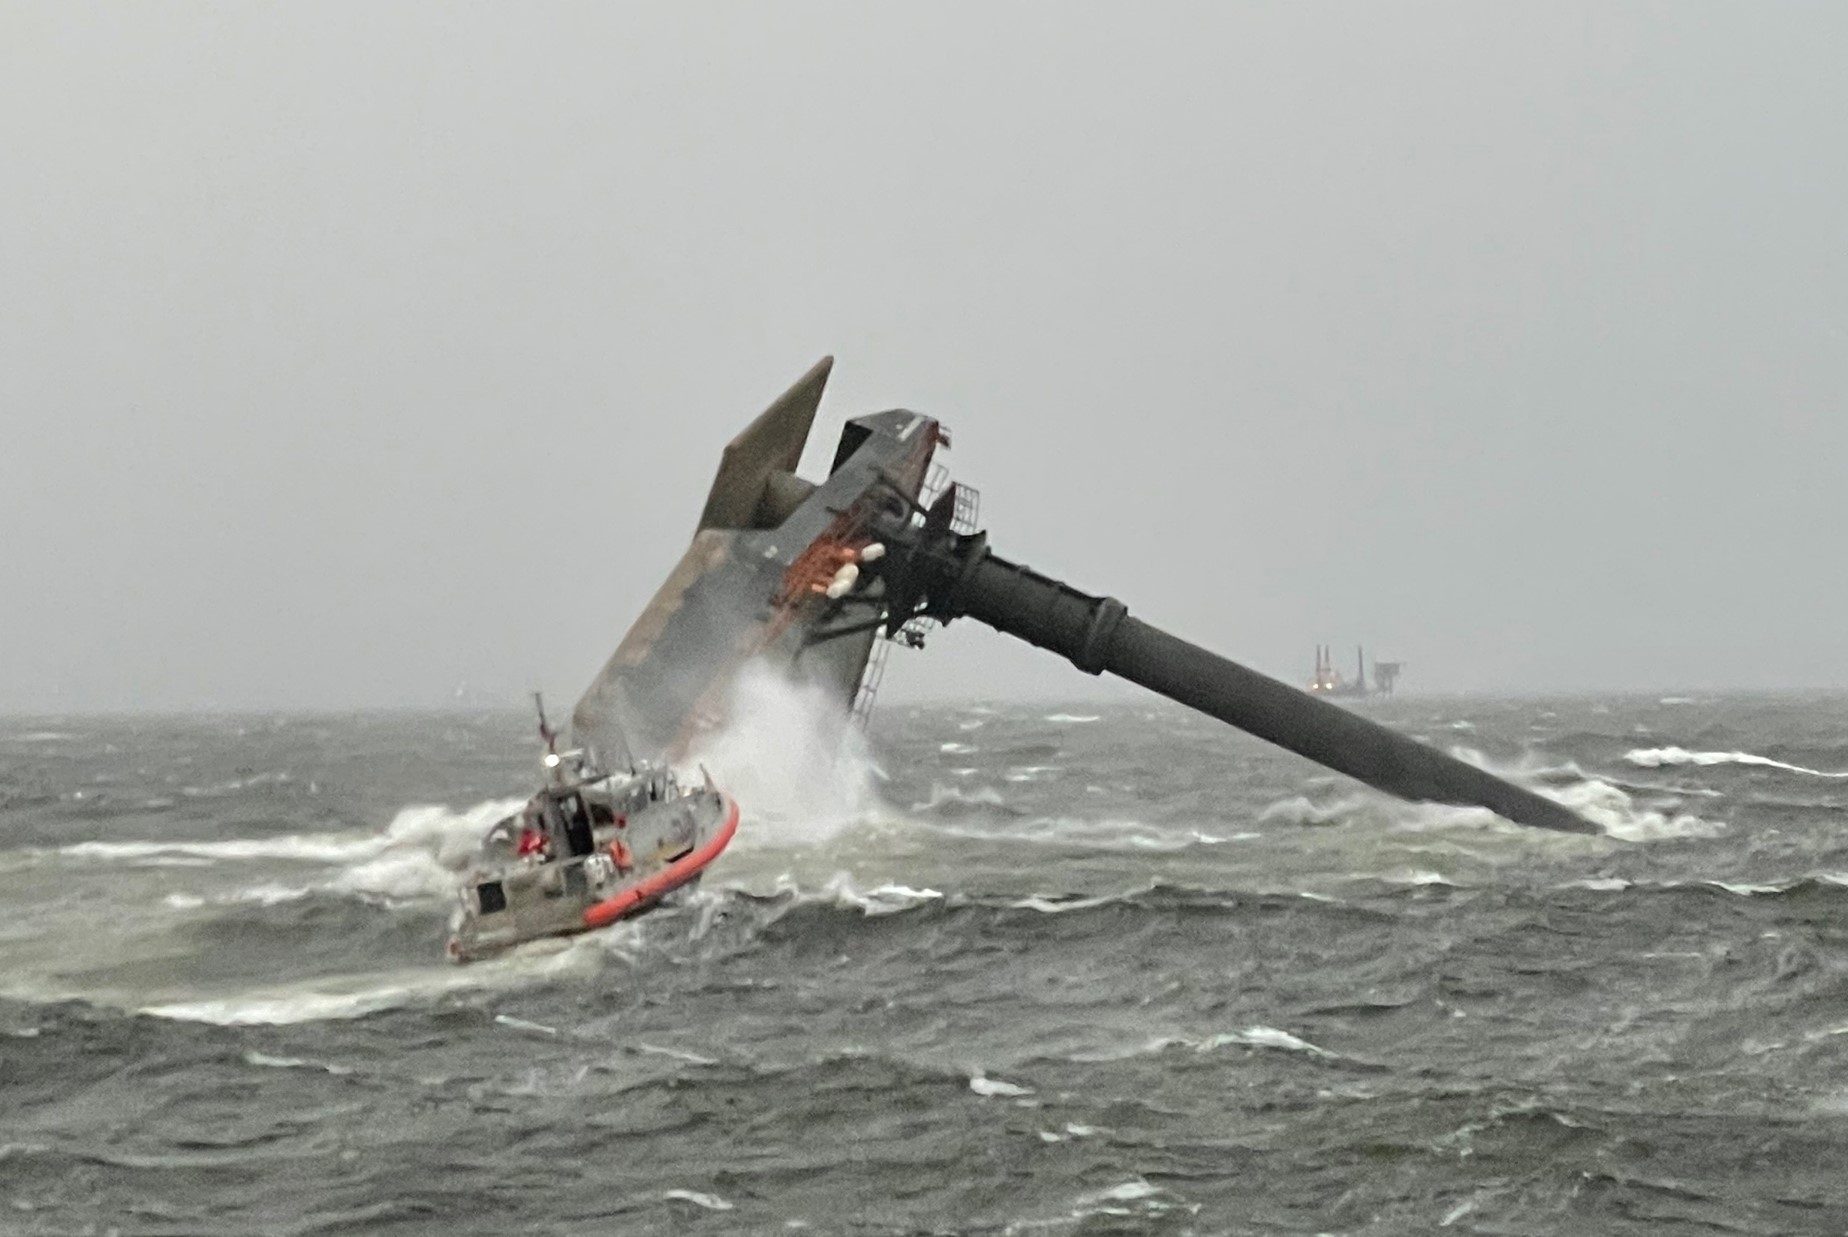 Image of capsized SEACOR POWER from April 14, 2021